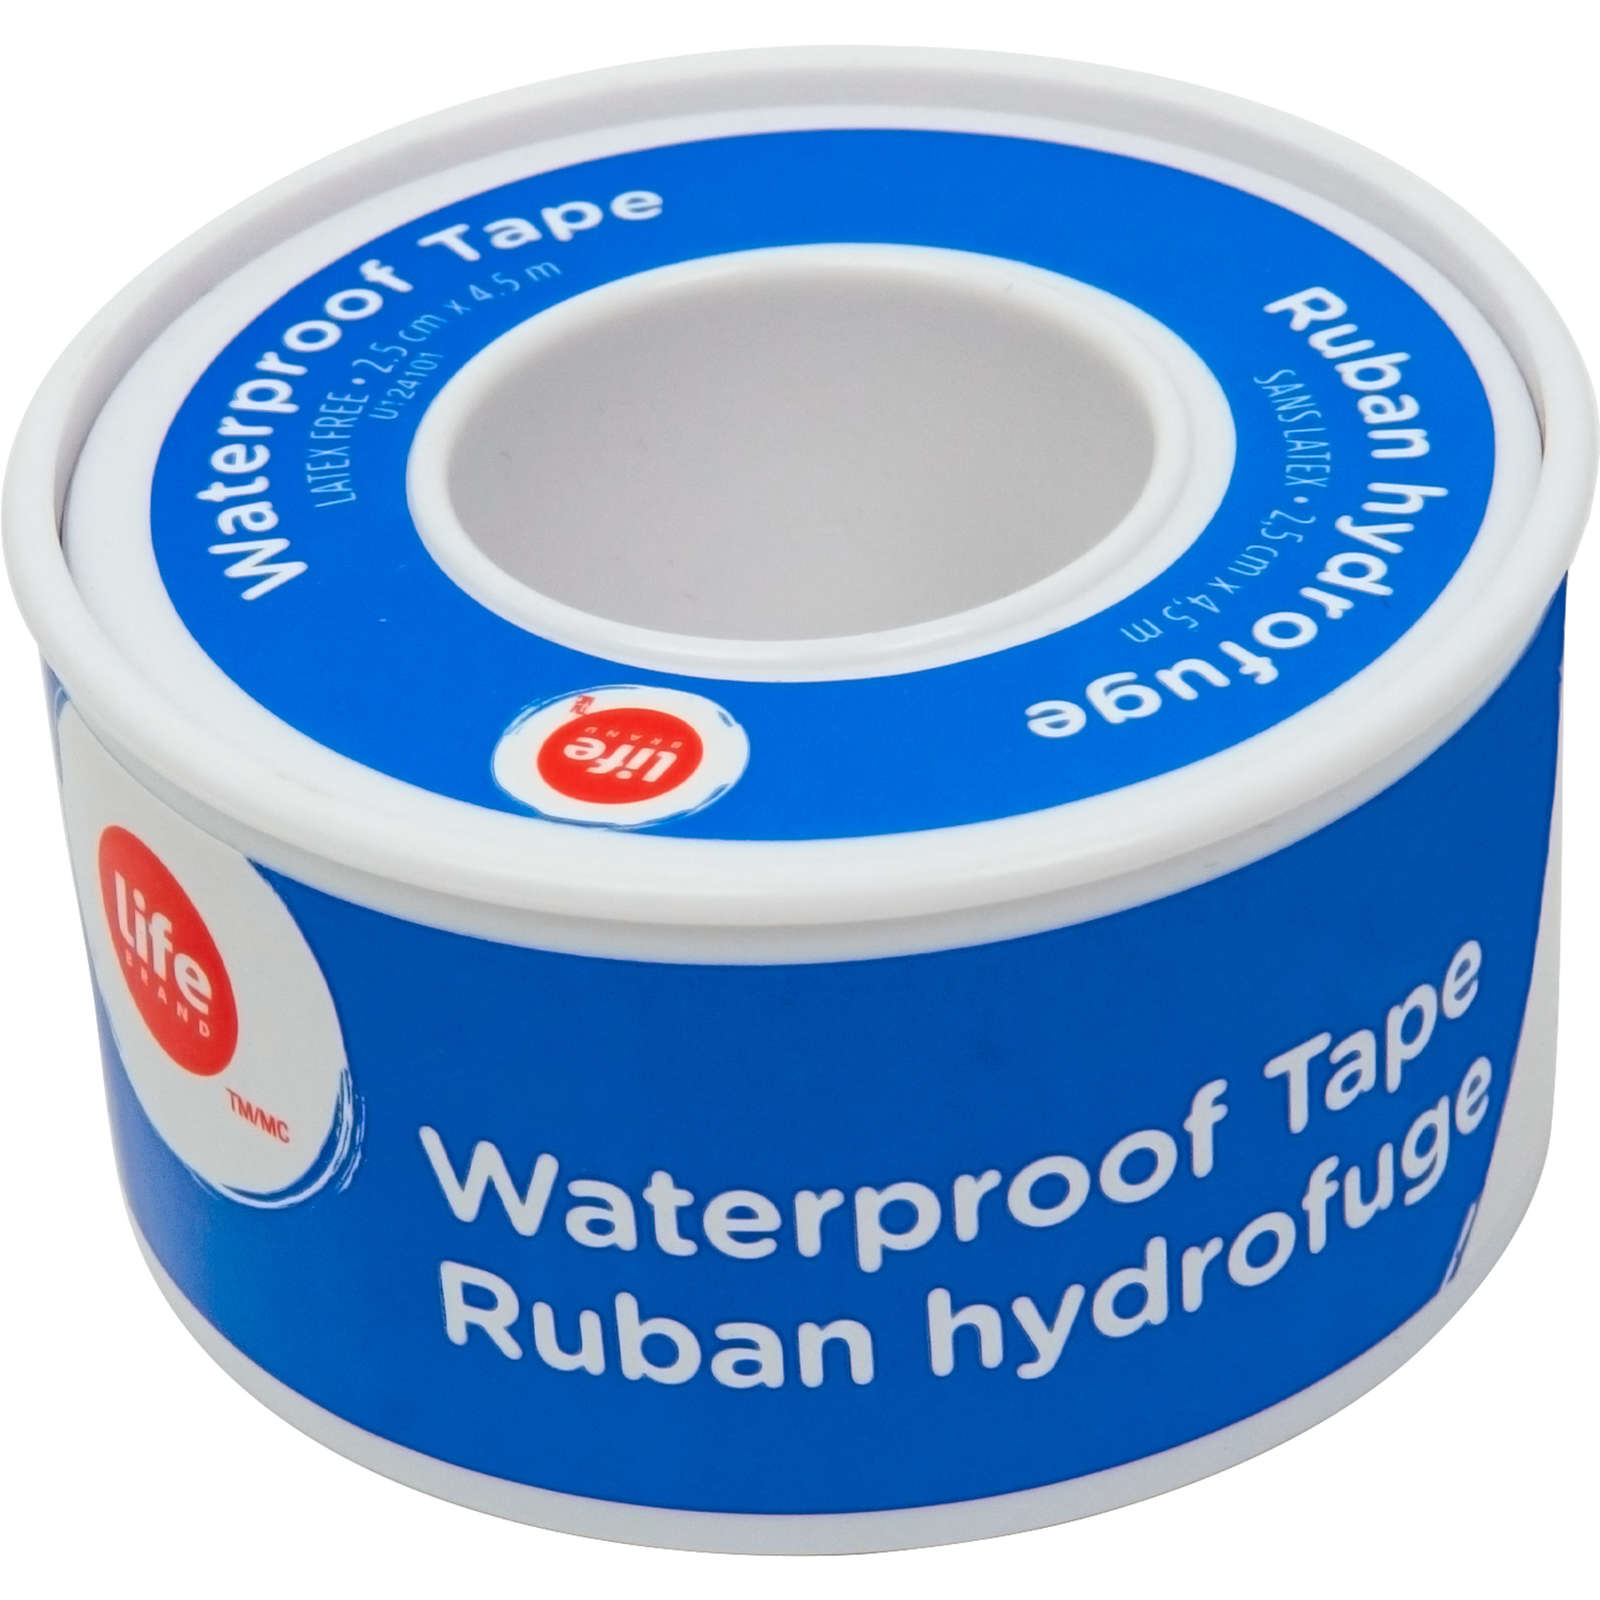 Waterproof Medical Tape for Mouth Taping